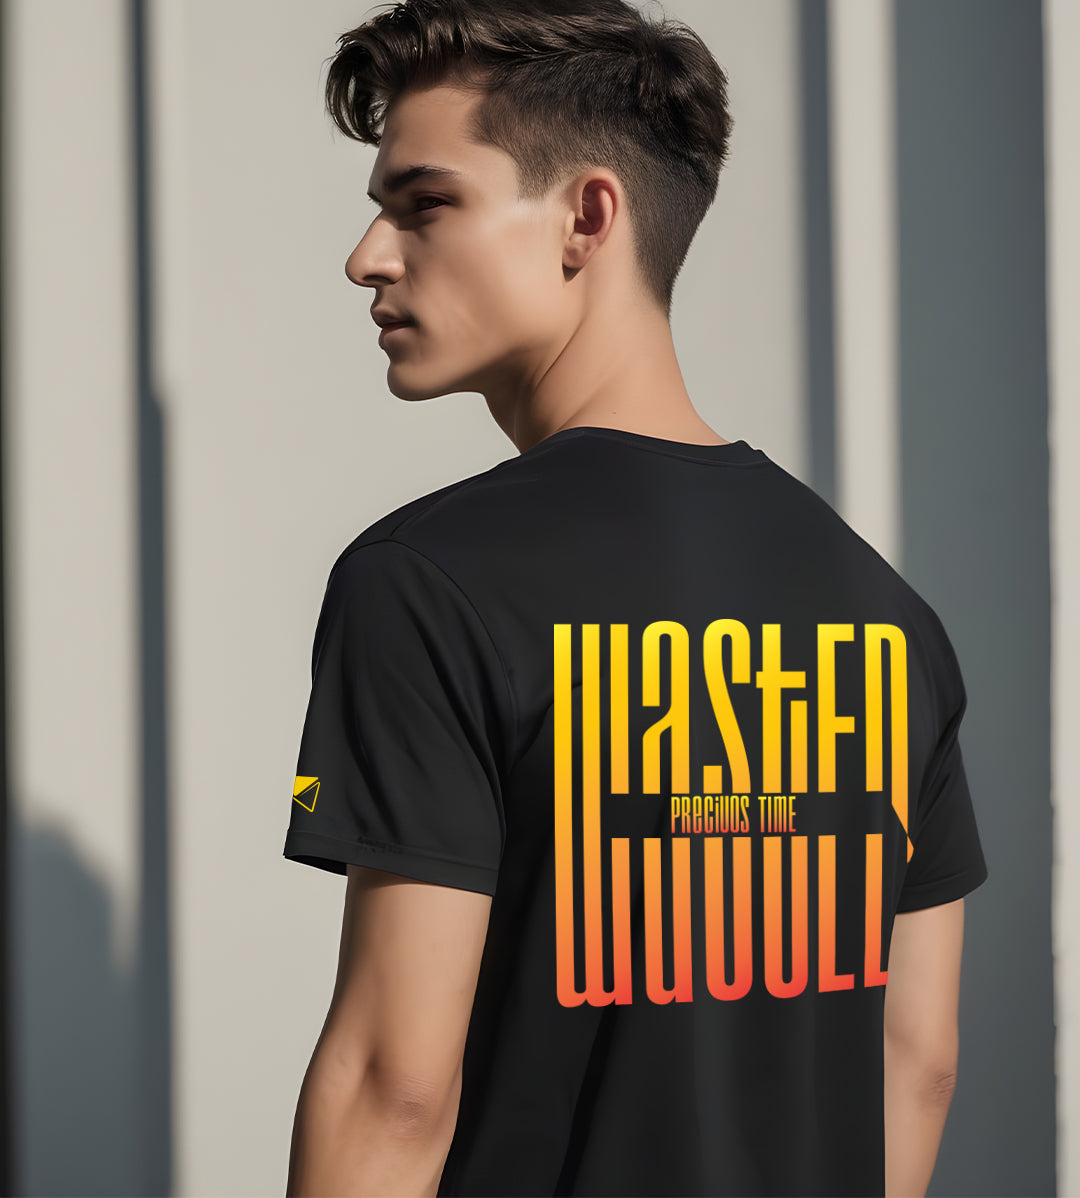 Precise Time Wasted T-Shirt